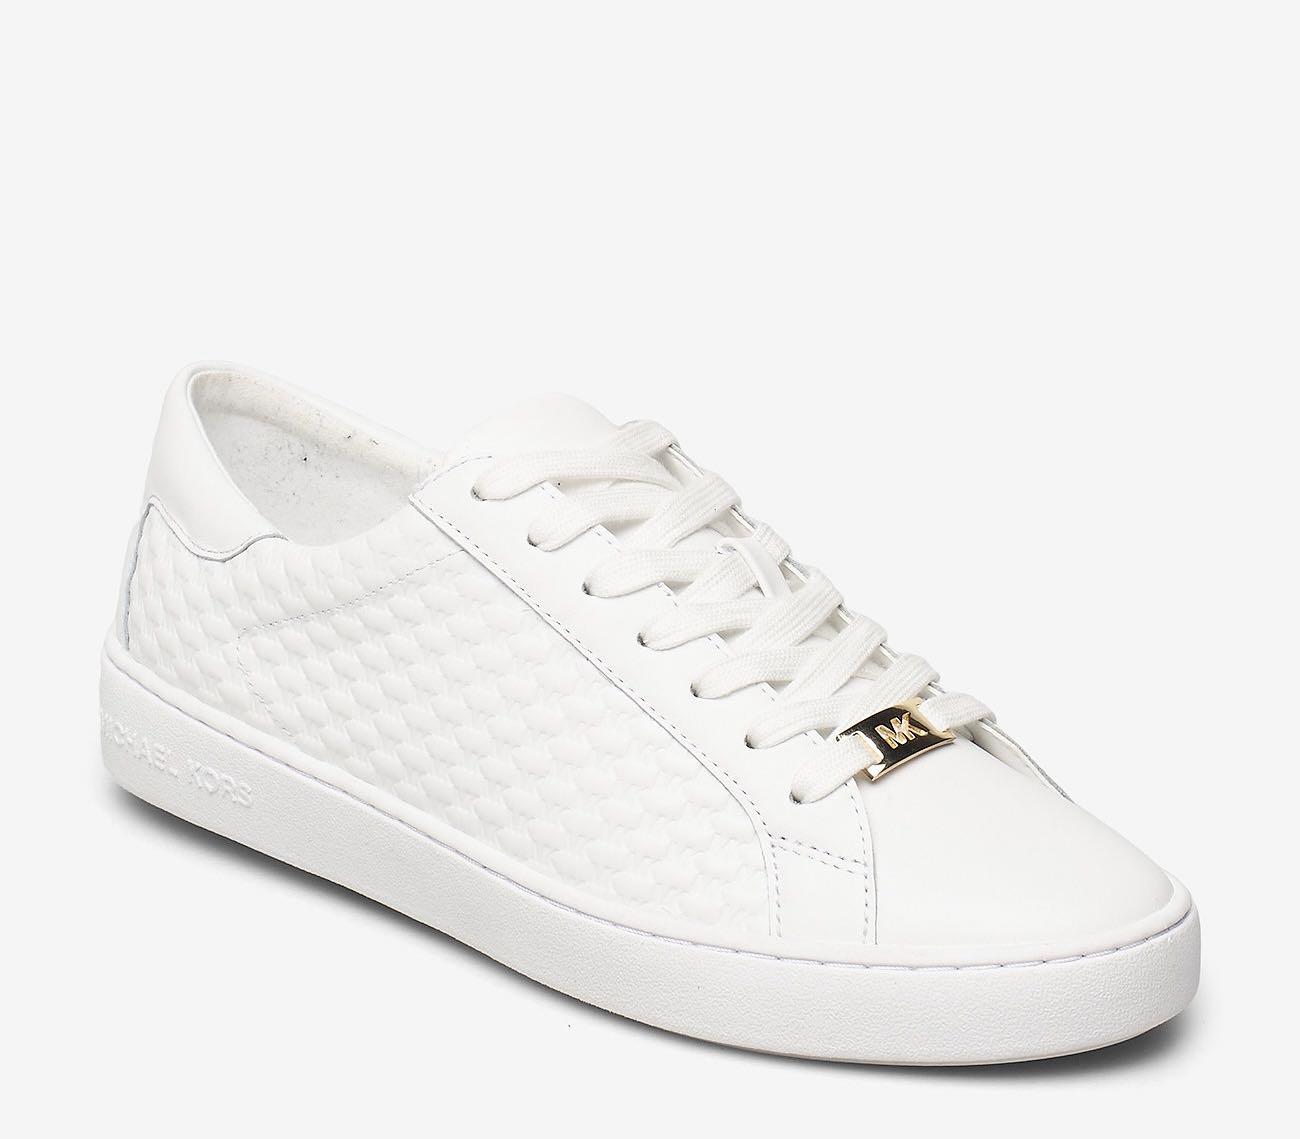 straal Maxim Thriller Michael Kors Colby Sneaker Optic White, Women's Fashion, Footwear, Sneakers  on Carousell